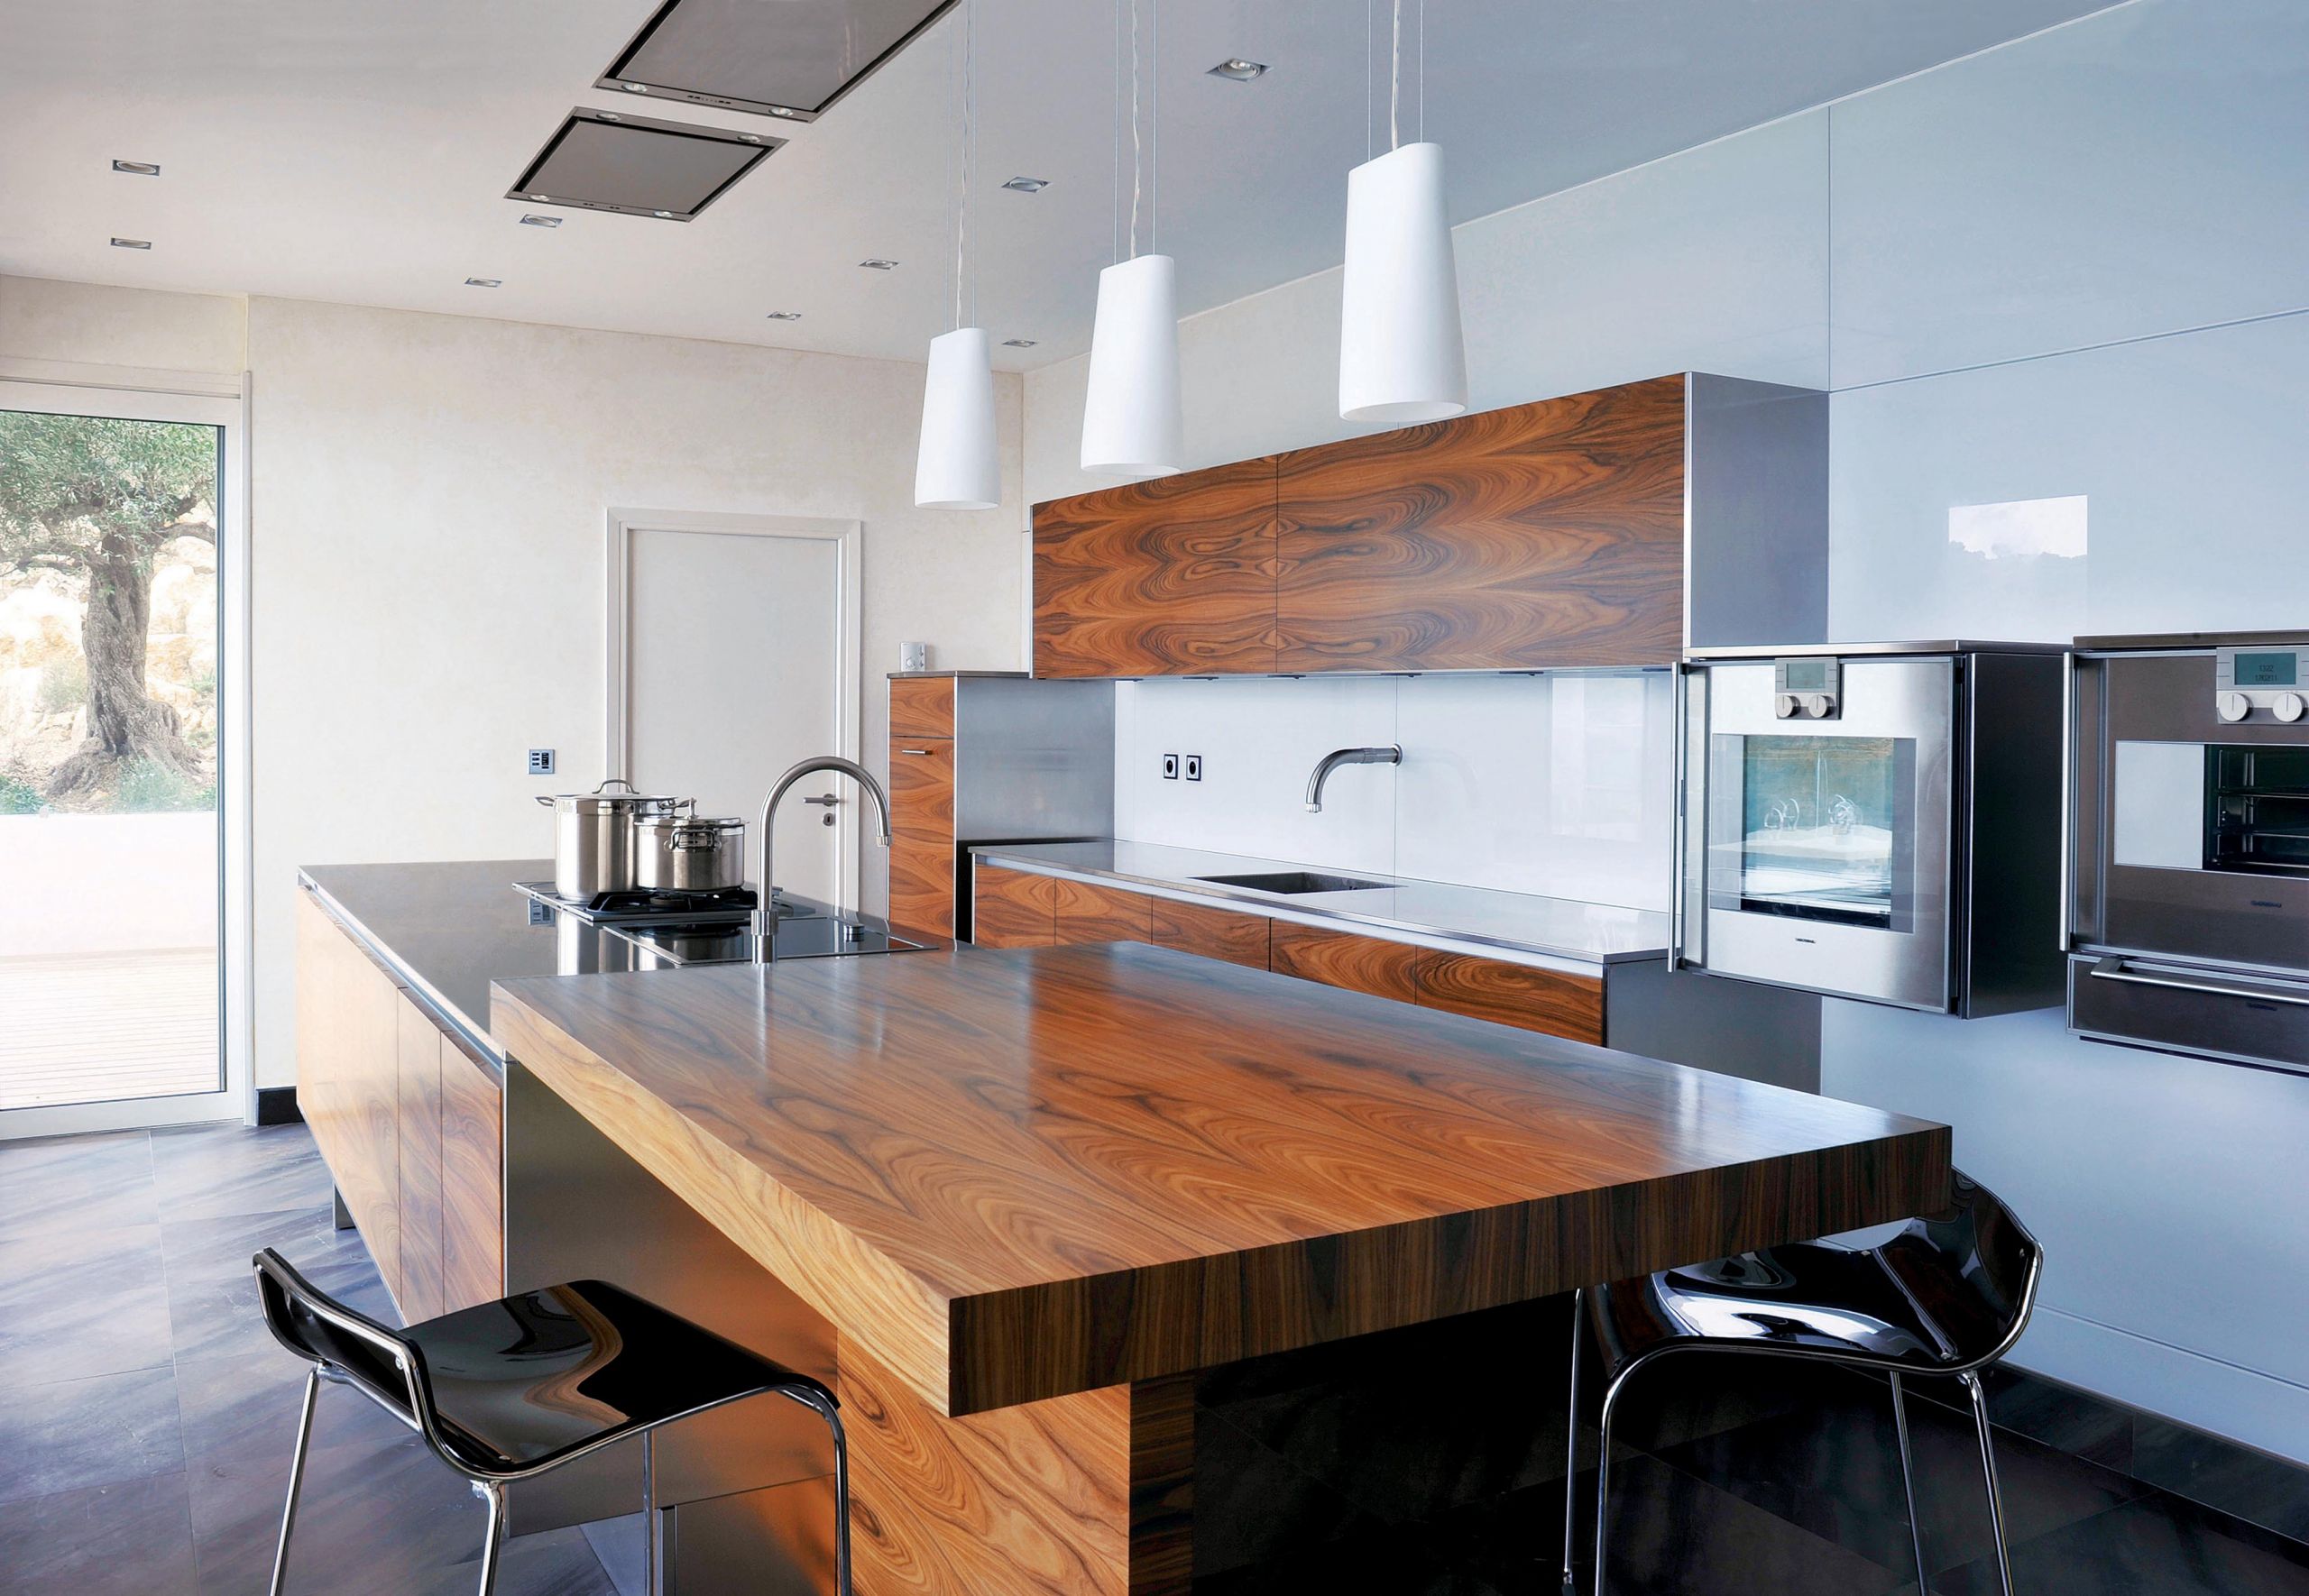 Excellence in working with premium materials to create precision kitchens with timeless elegance